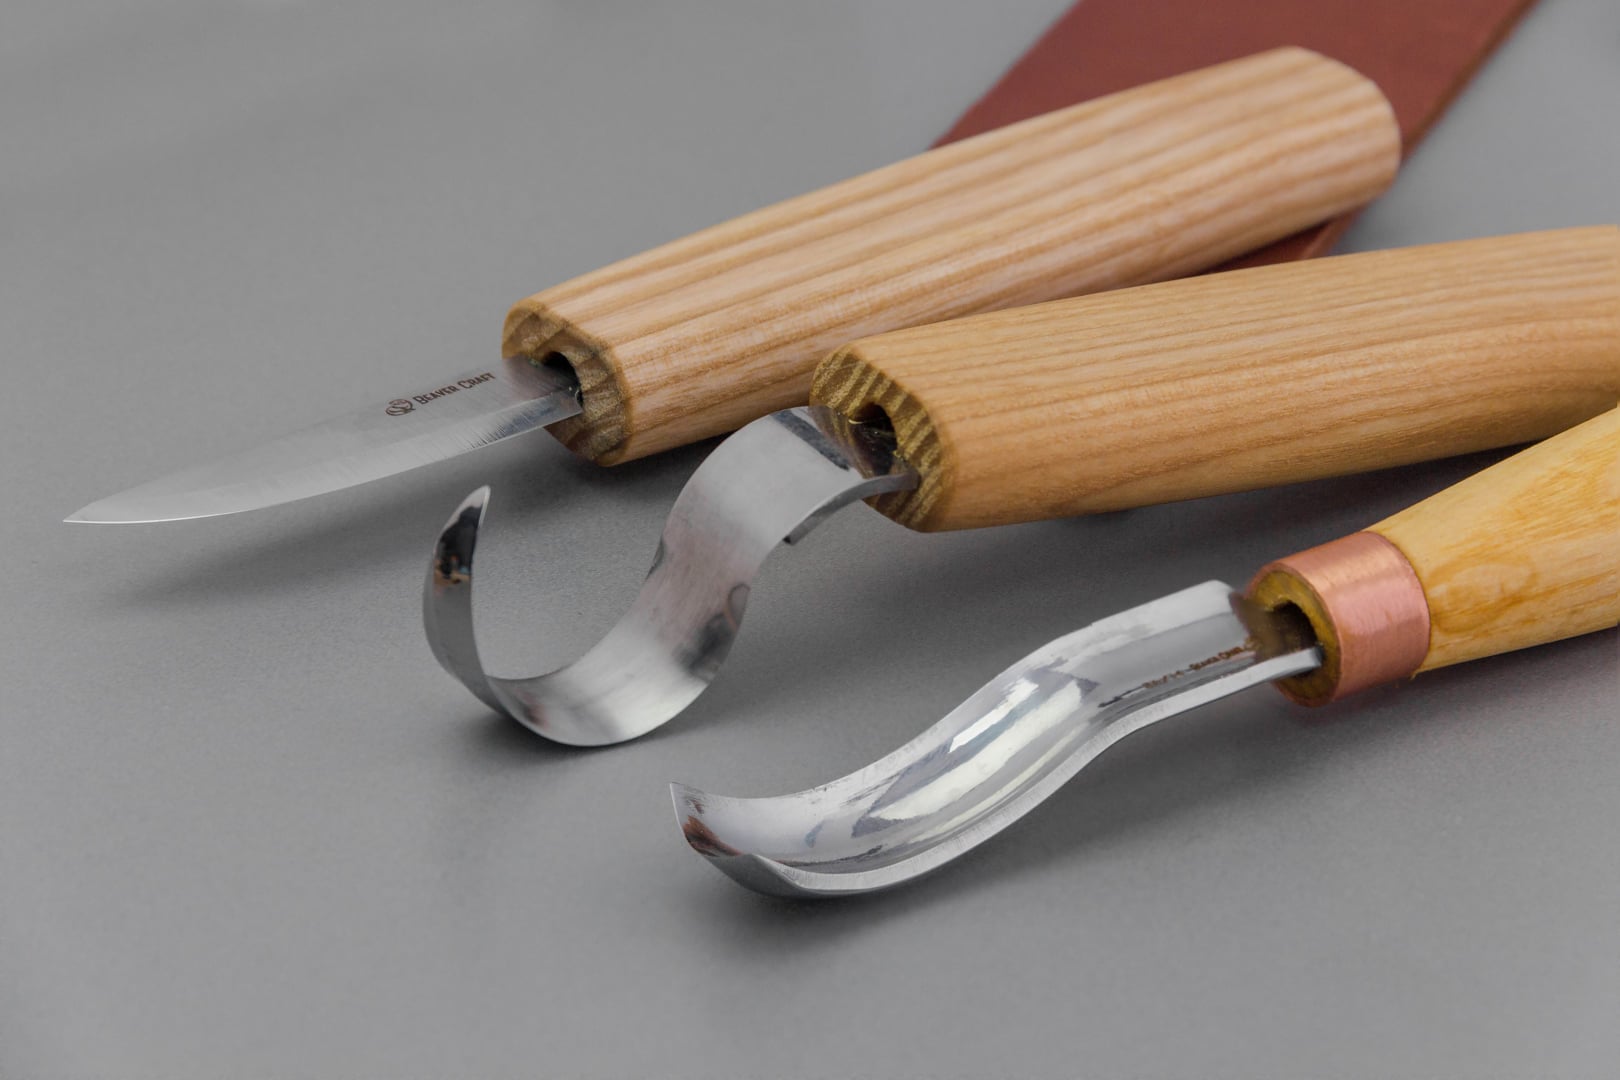 Can you use wood carving tools on leather?